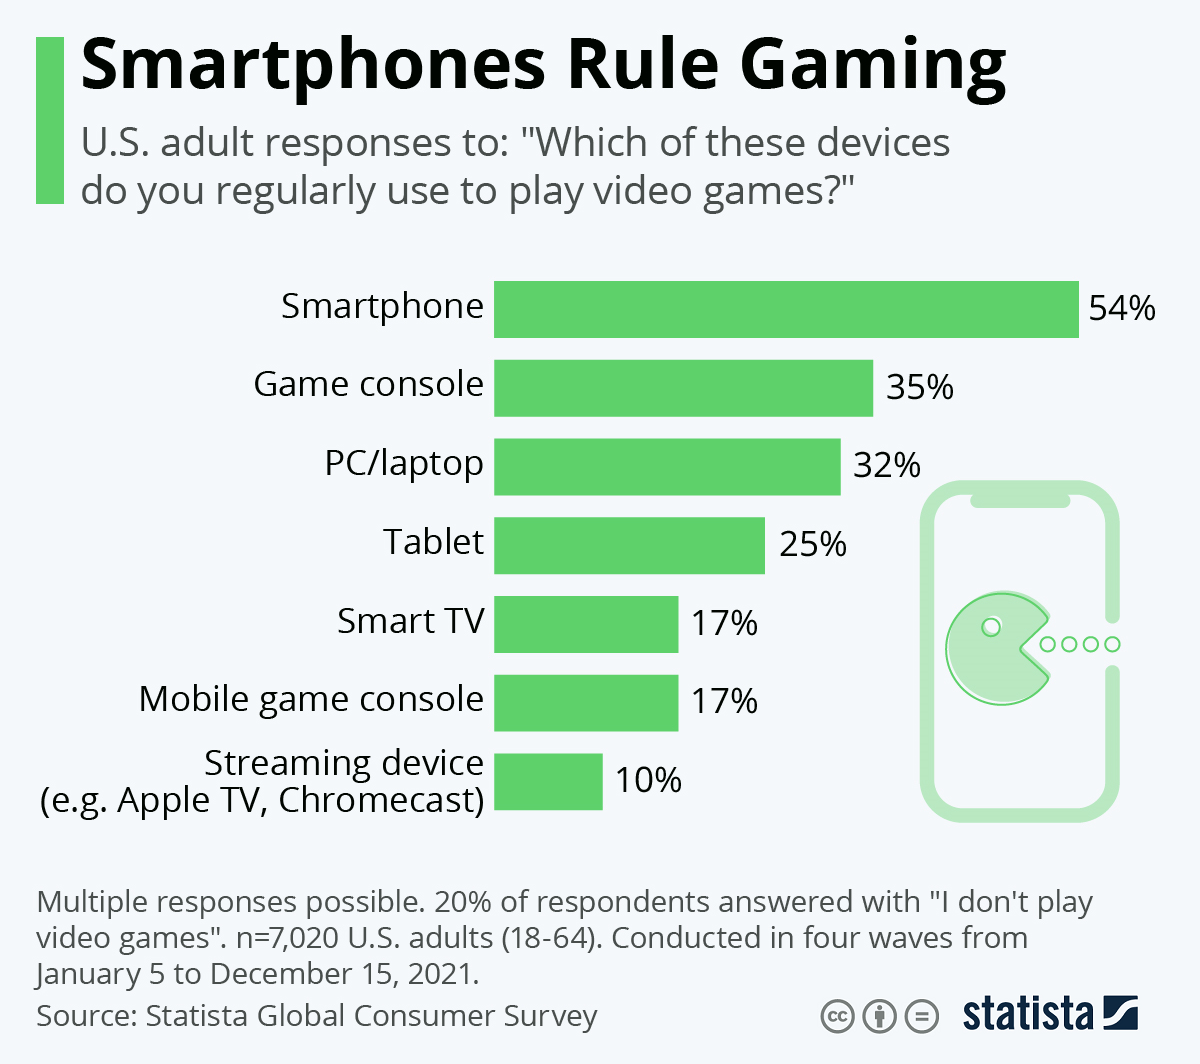 5 Reasons Why Real Money Mobile Gaming will Benefit You